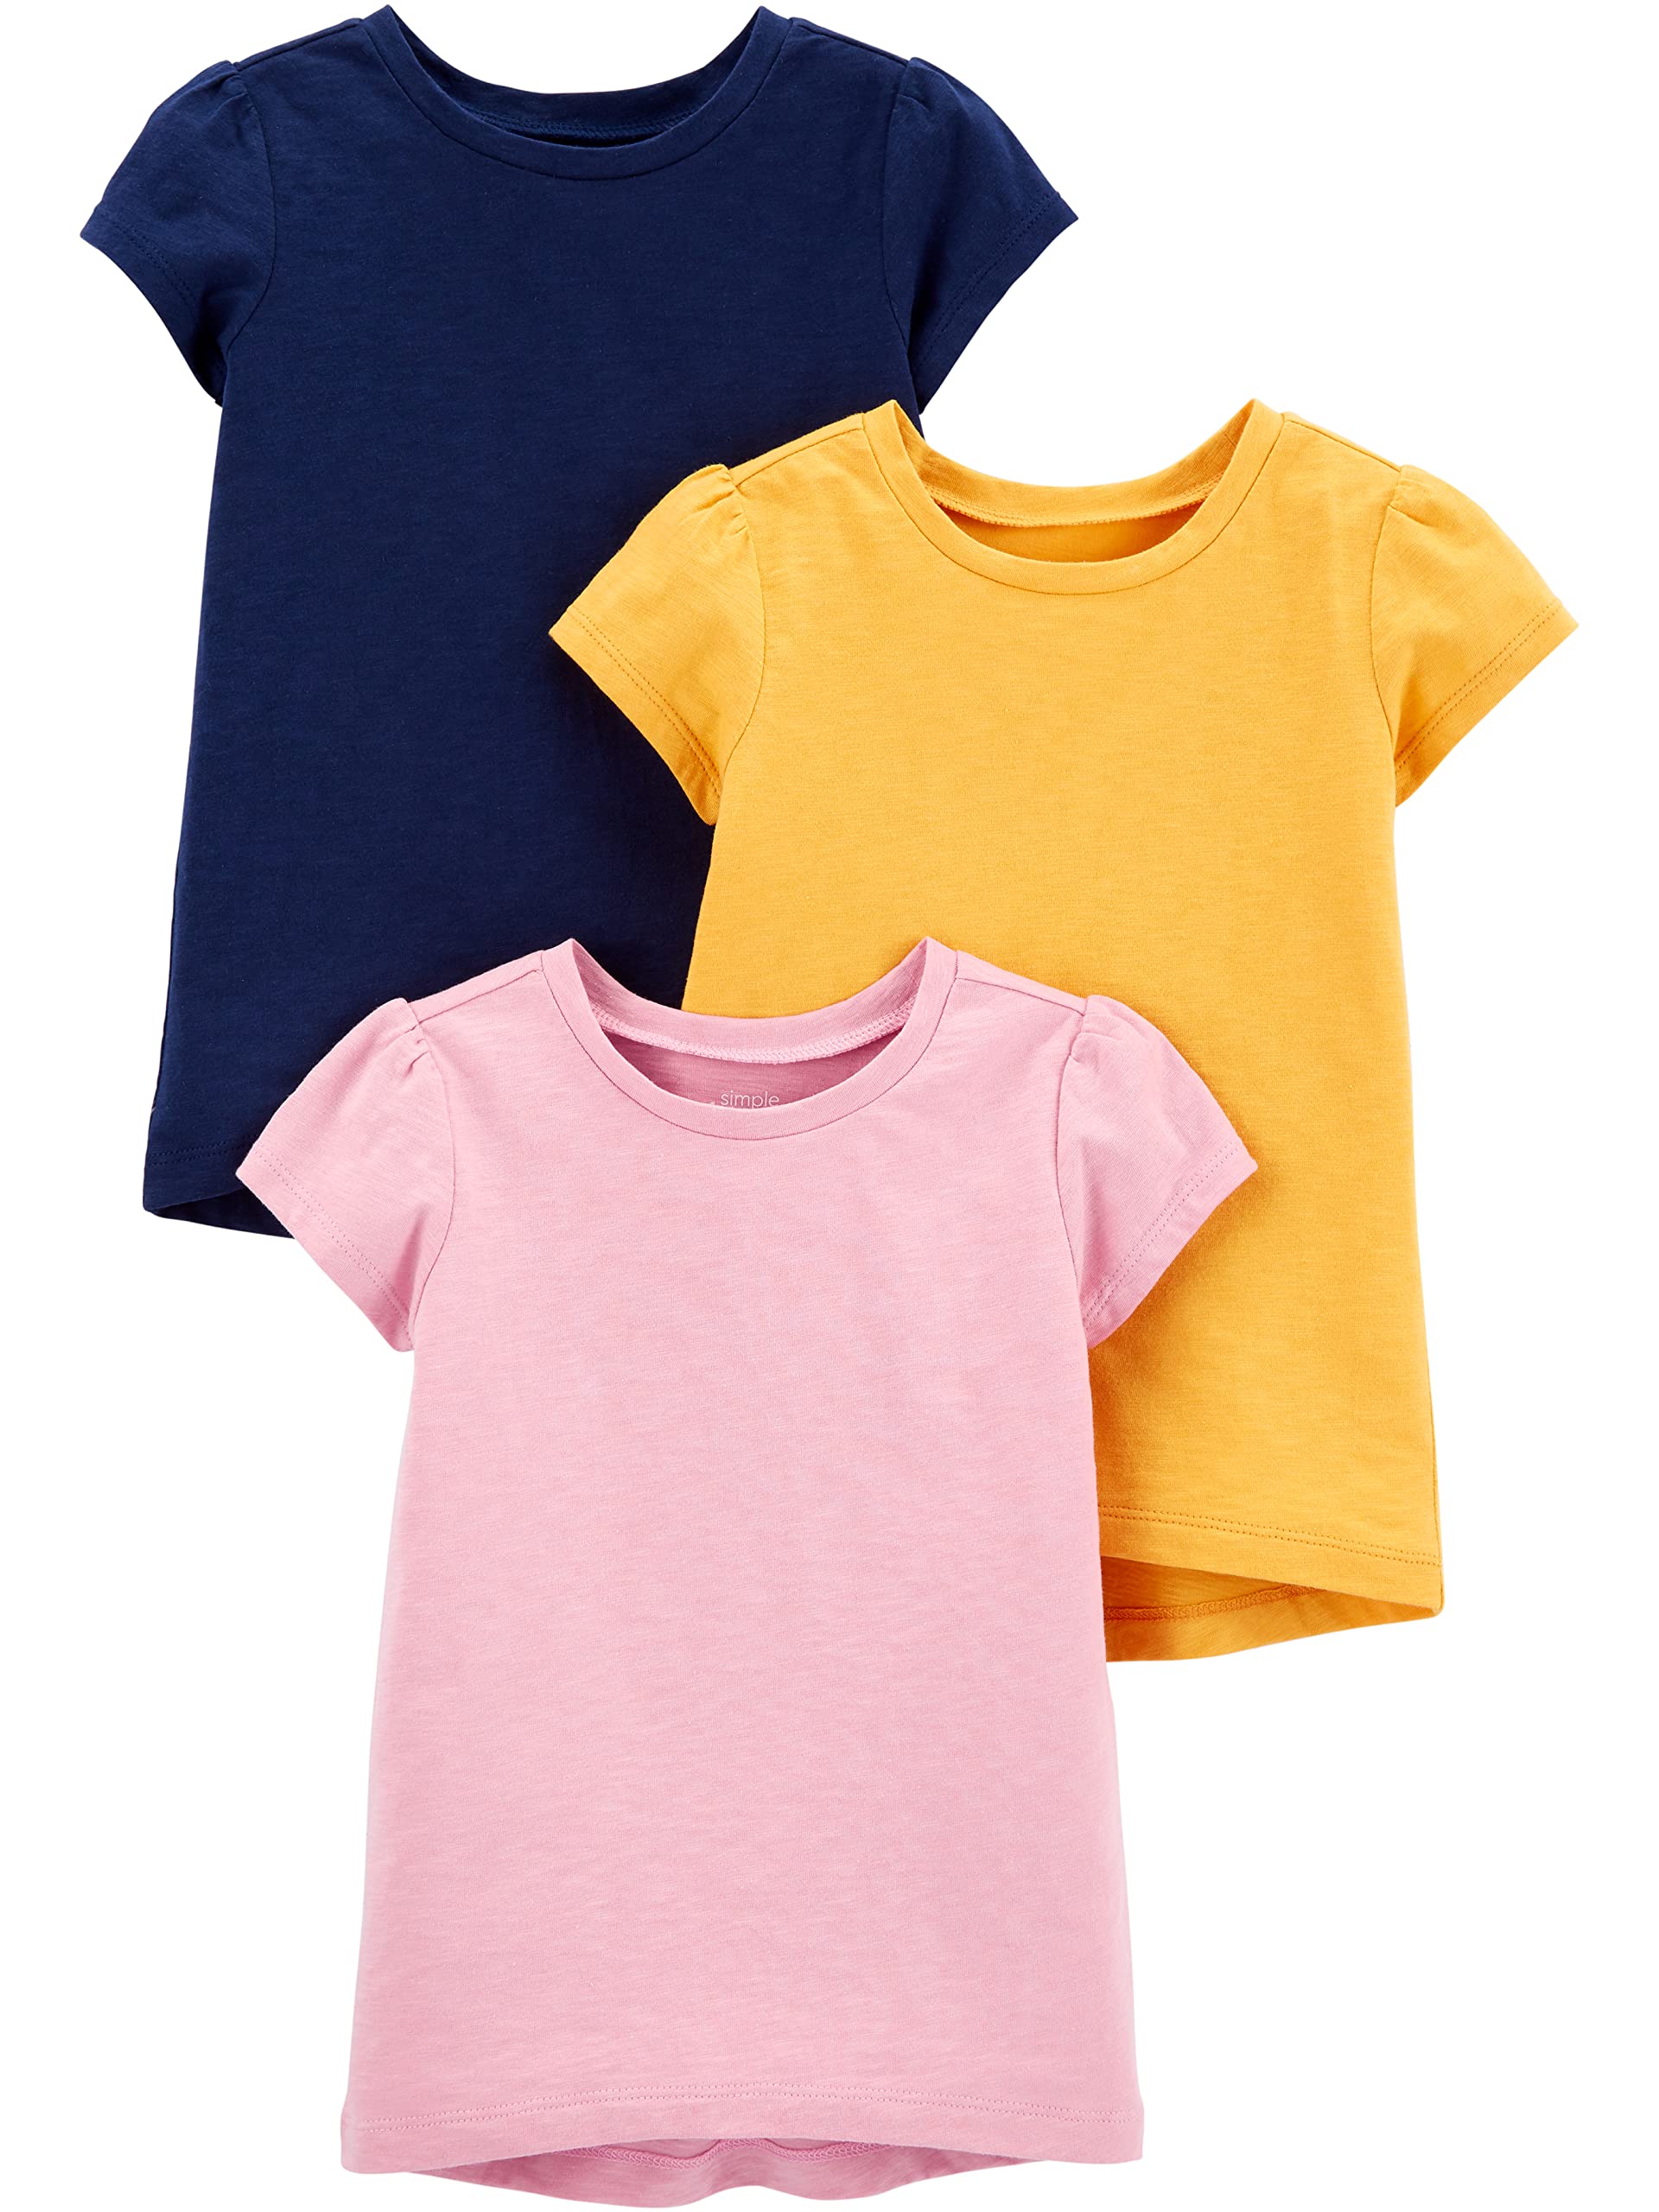 Simple Joys by Carter's Babies, Toddlers, and Girls' Solid Short-Sleeve Tee Shirts, Pack of 3